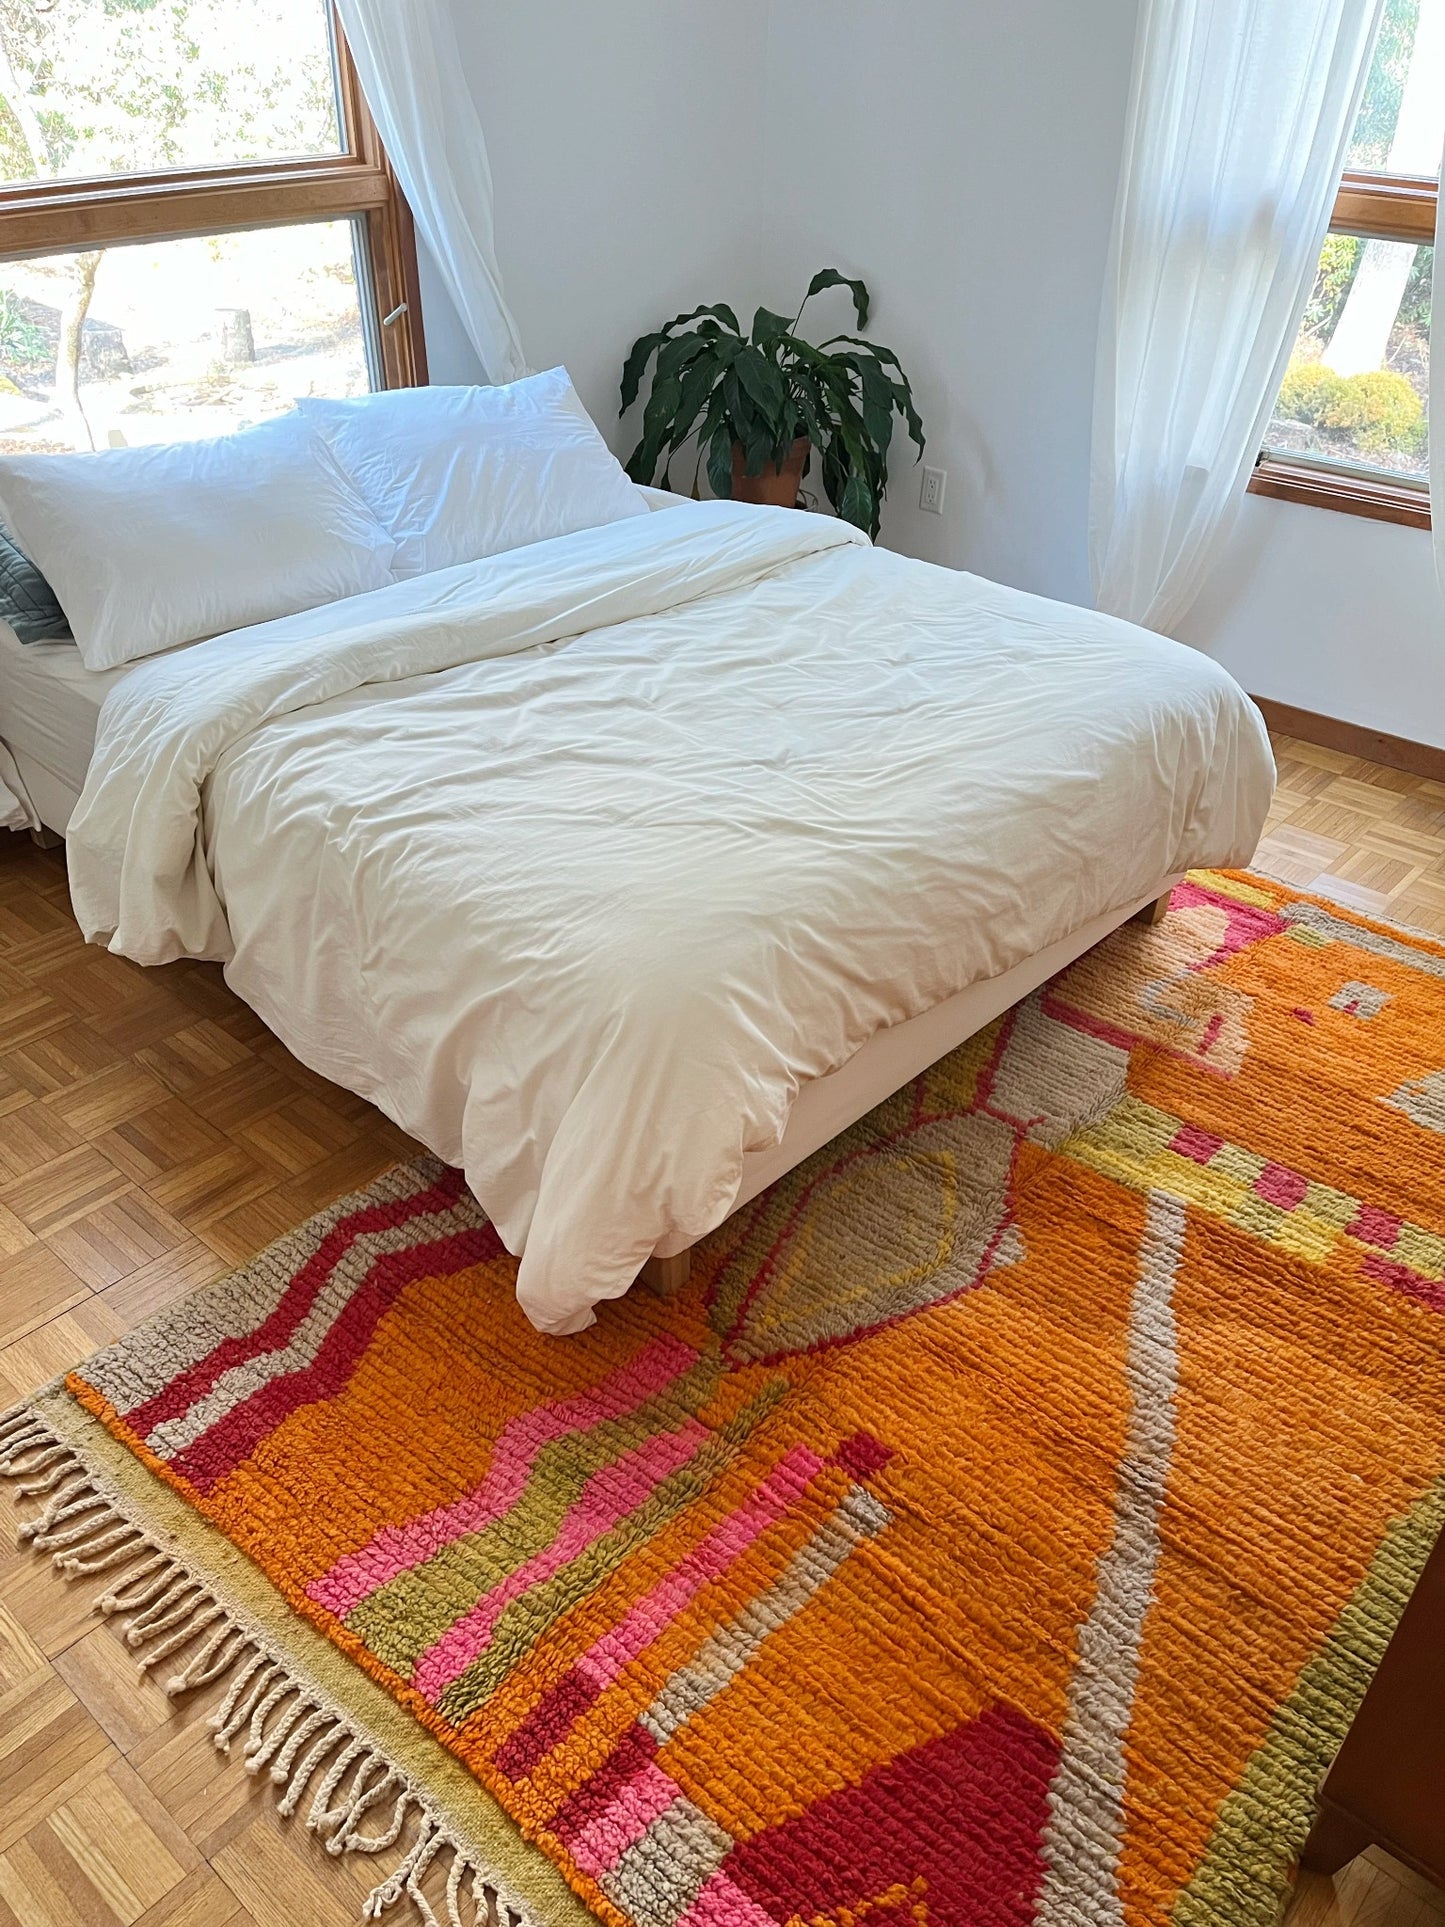 Style Ojos bright colored Moroccan Rug in a Bedroom